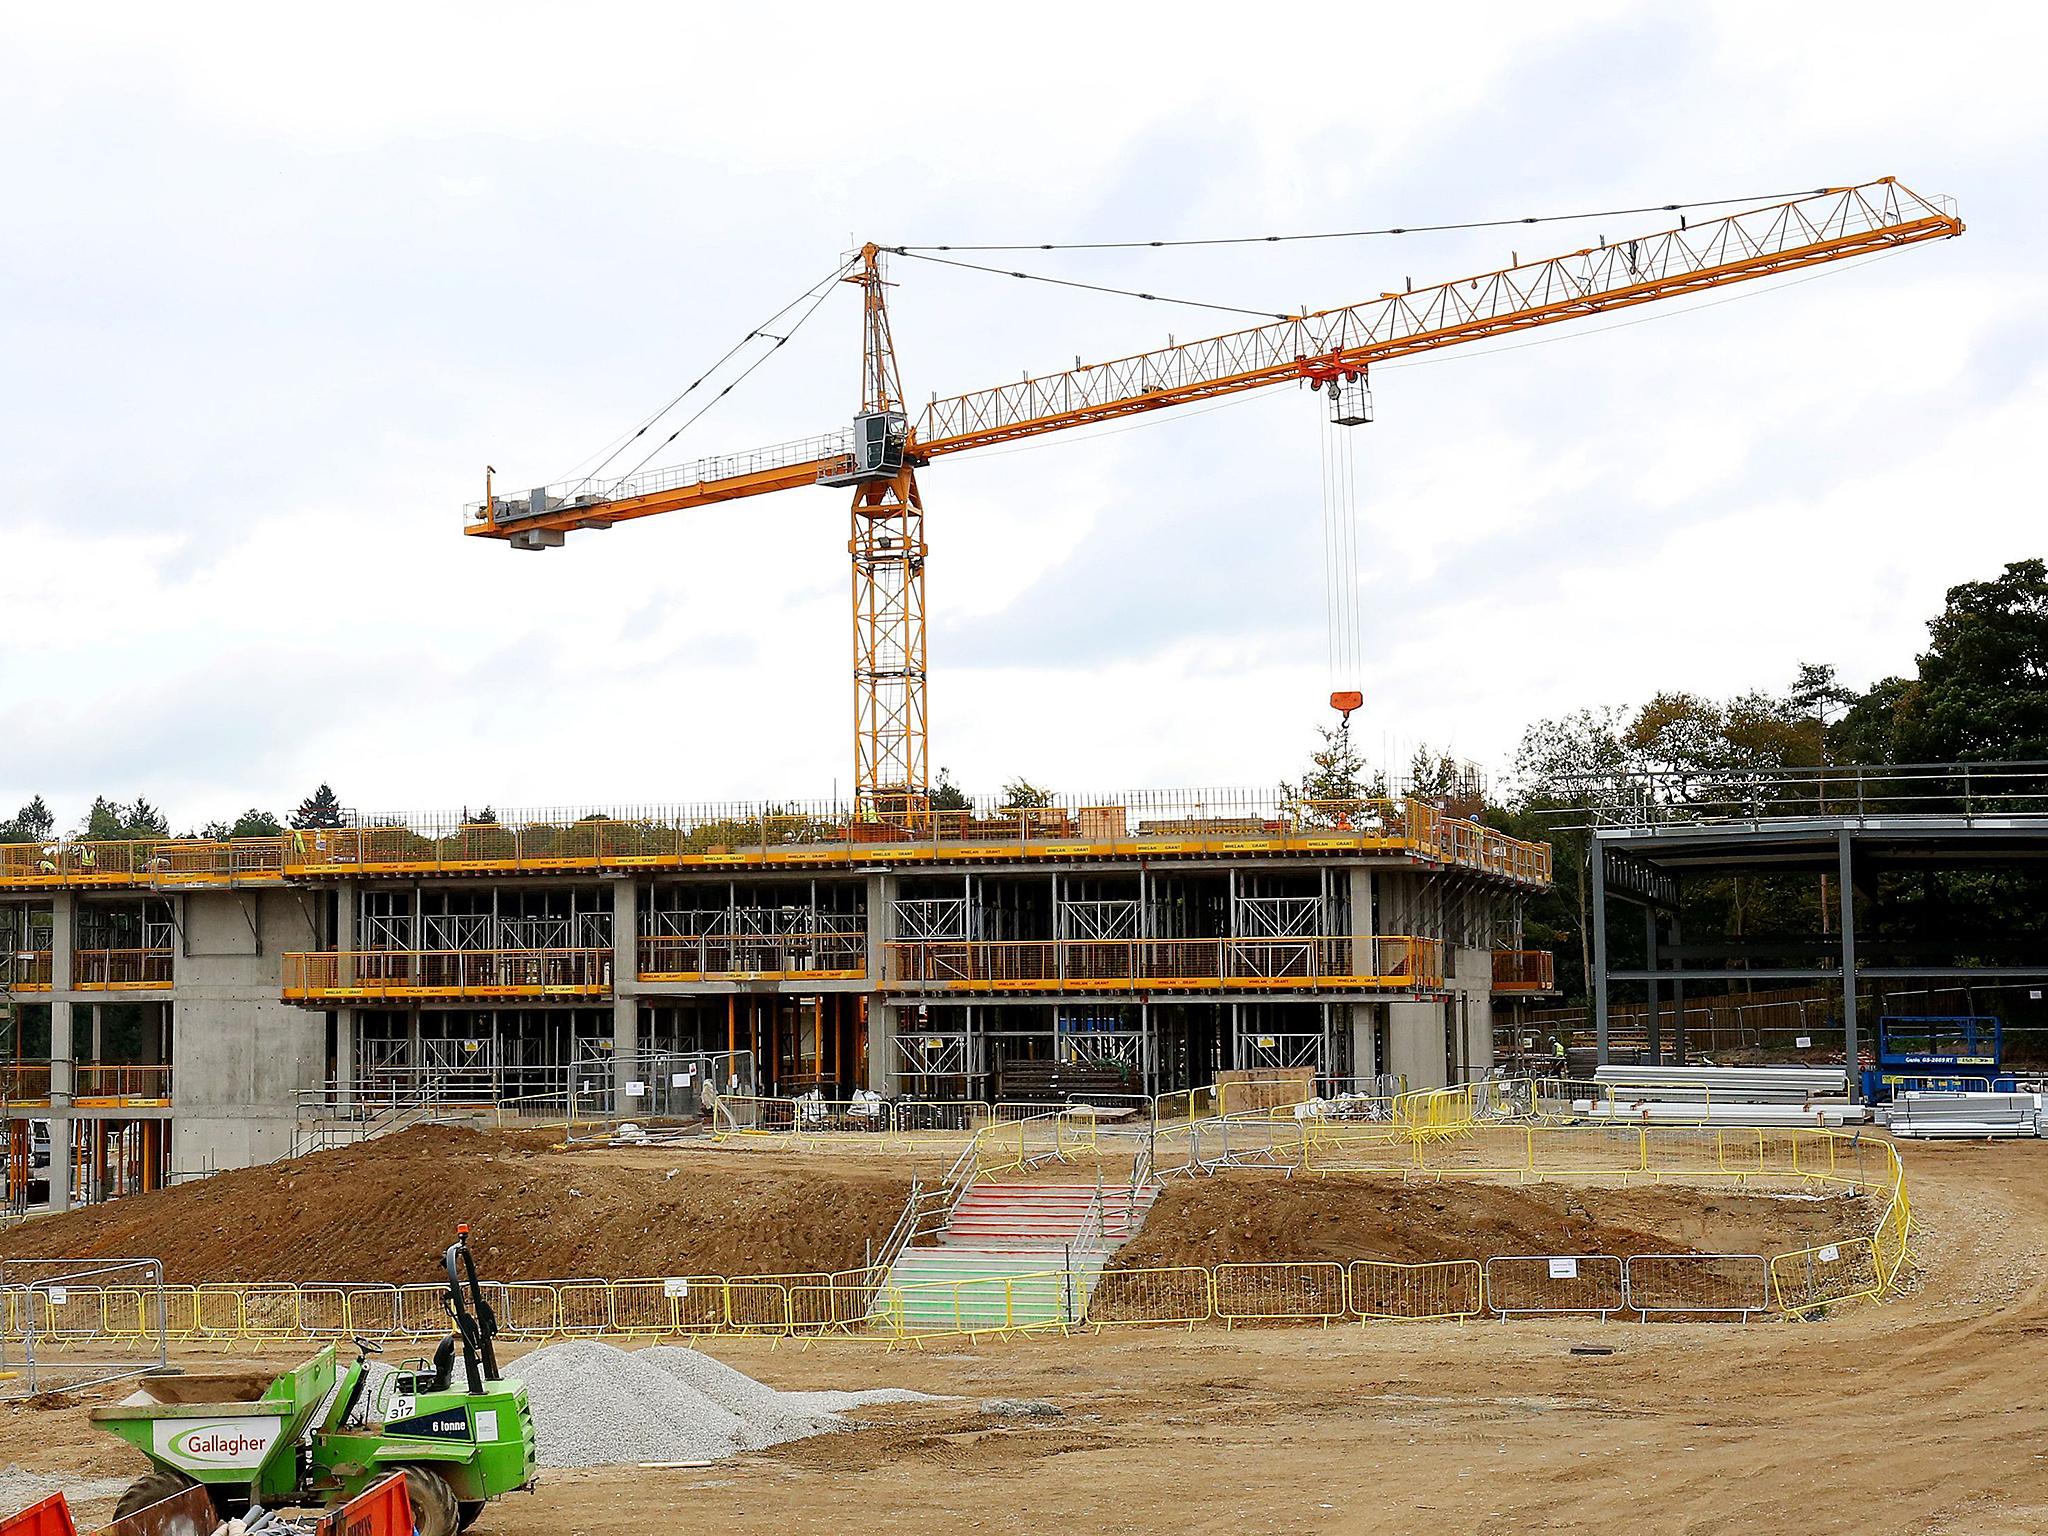 A construction site in Sevenoaks, Kent, where the first 'new' grammar school in 50 years is being built